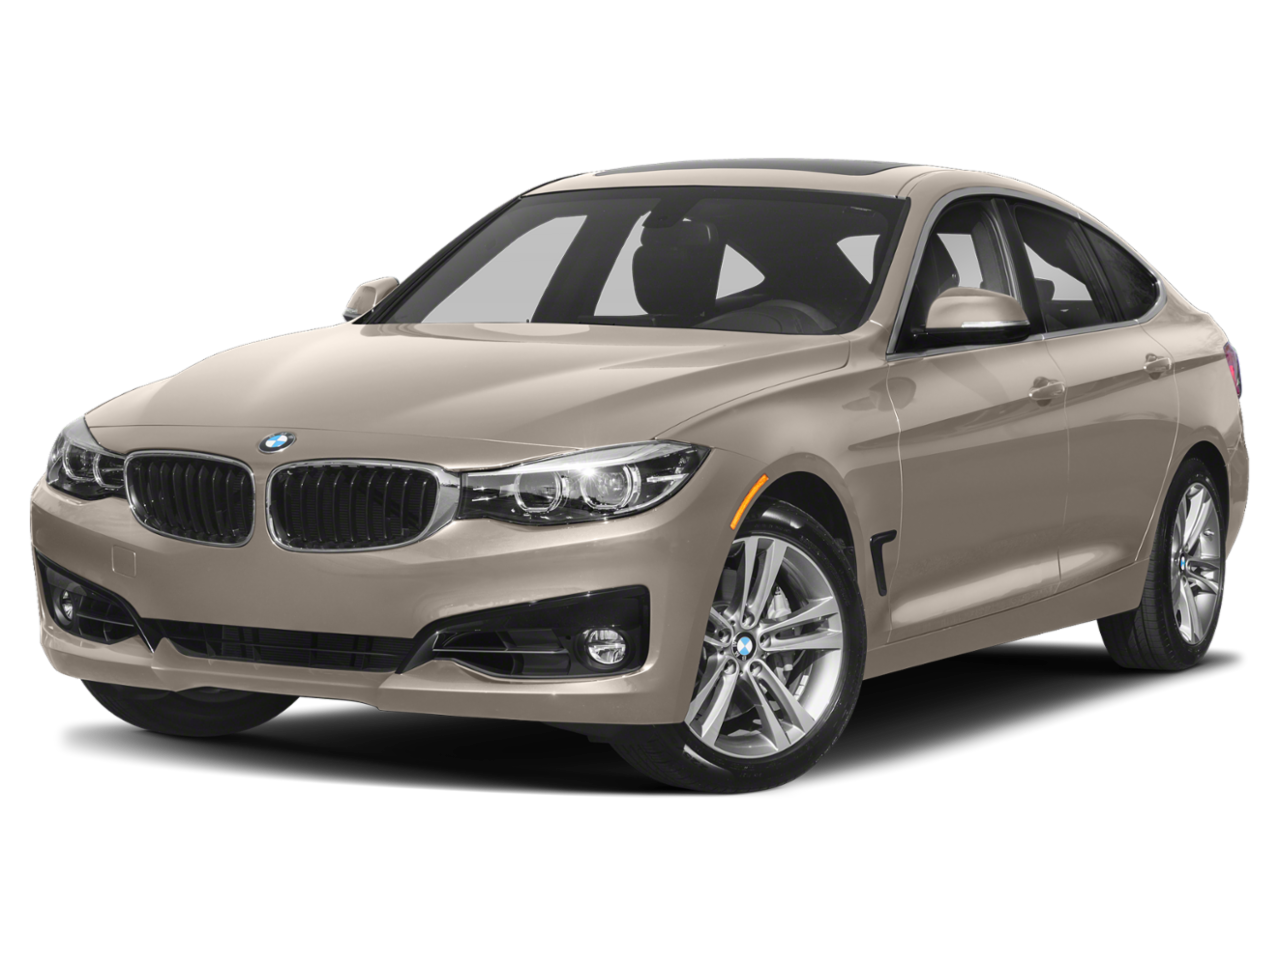 BMW 340i GT xDrive Repair: Service and Maintenance Cost